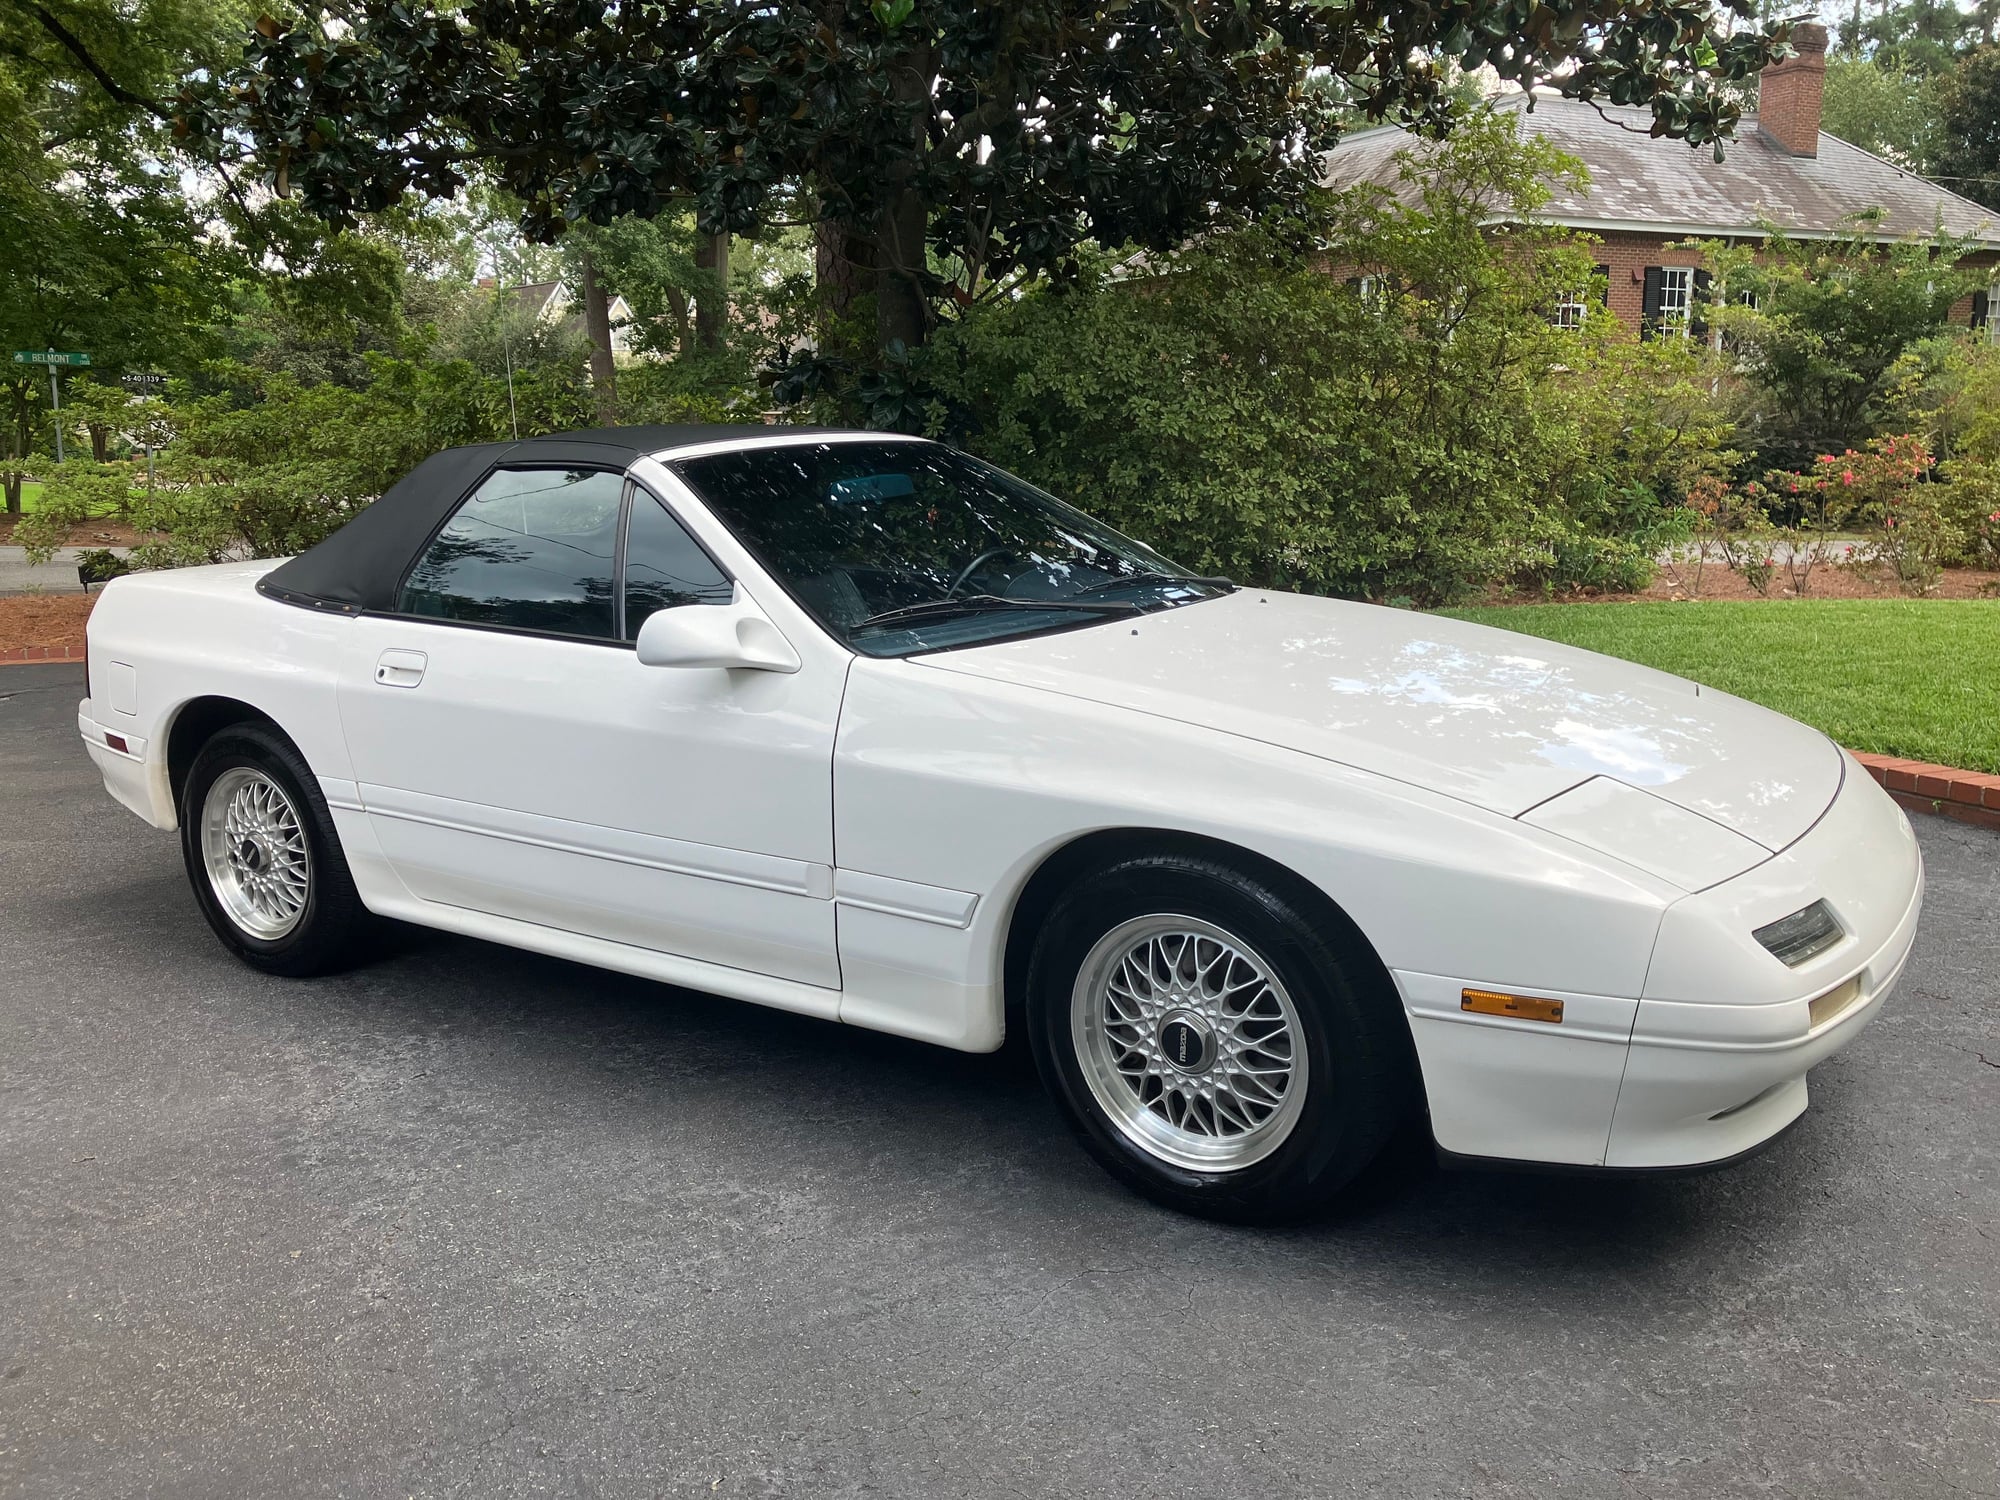 1991 Mazda RX-7 - 1991 RX7 Convertible - Used - VIN JM1FC3520M0903350 - Other - 2WD - Manual - Convertible - White - Columbia, SC 29205, United States